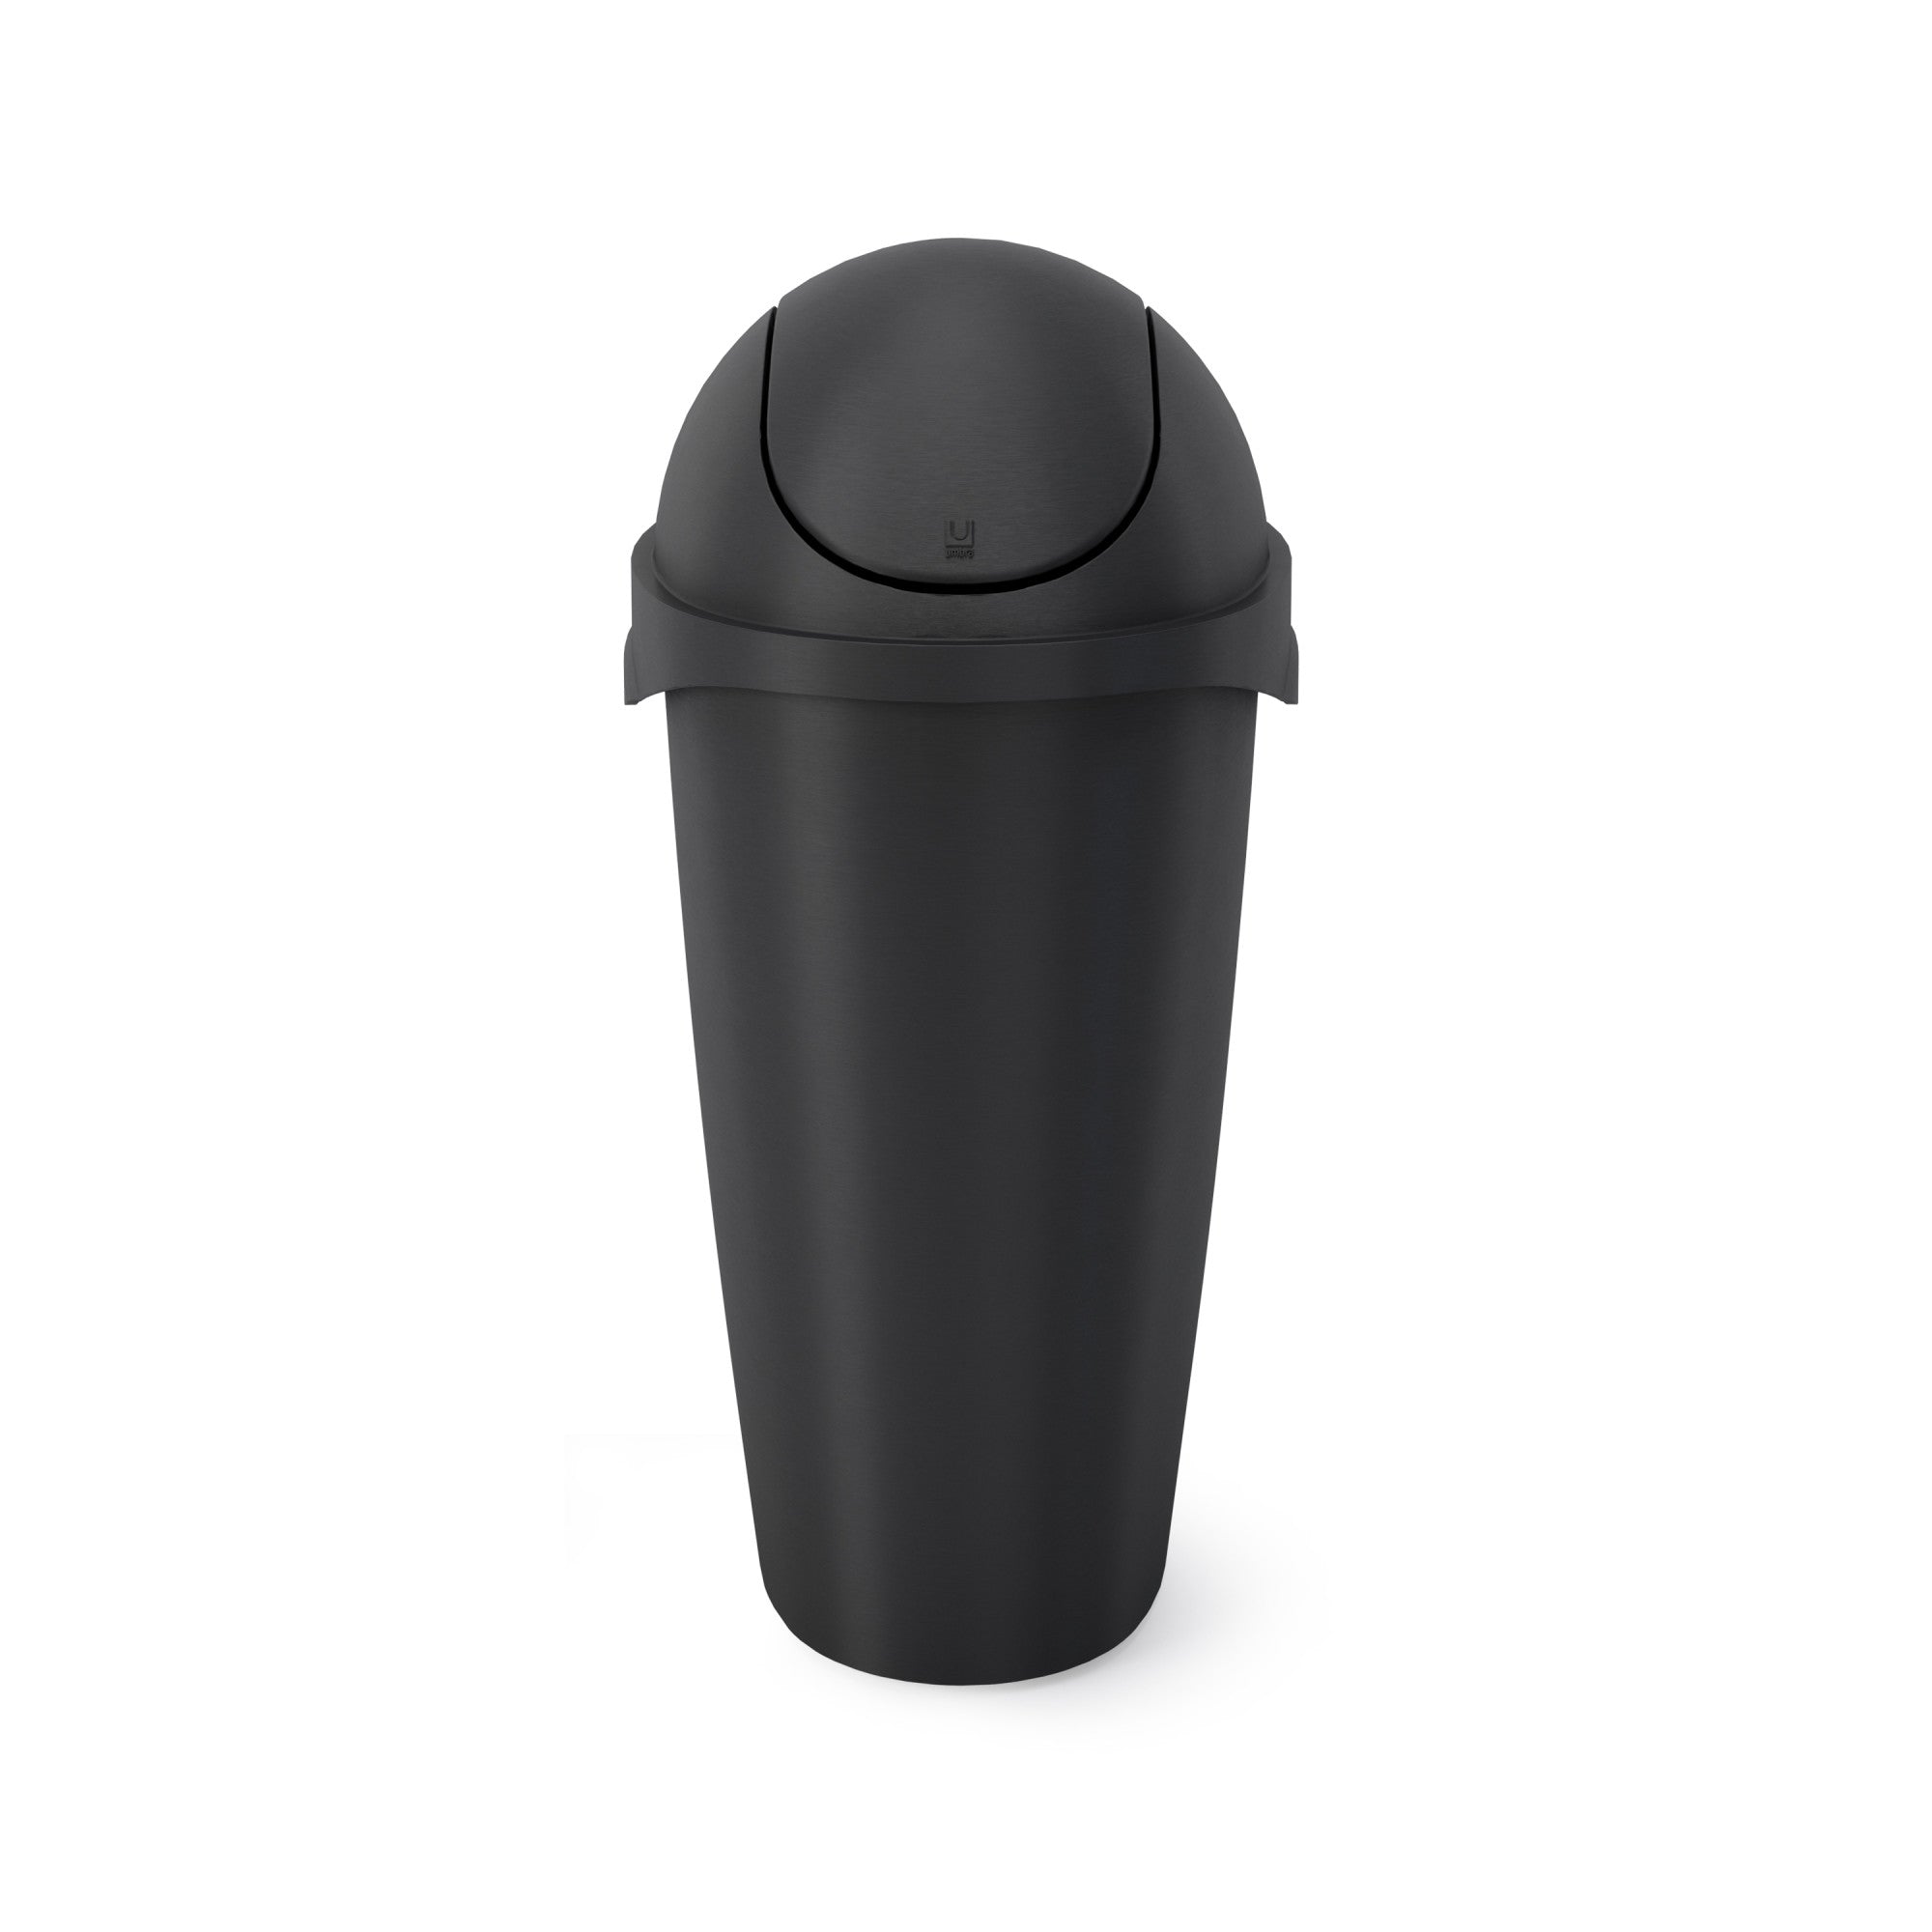 Large Trash Can with Swing-Top Lid | Swinger by Umbra